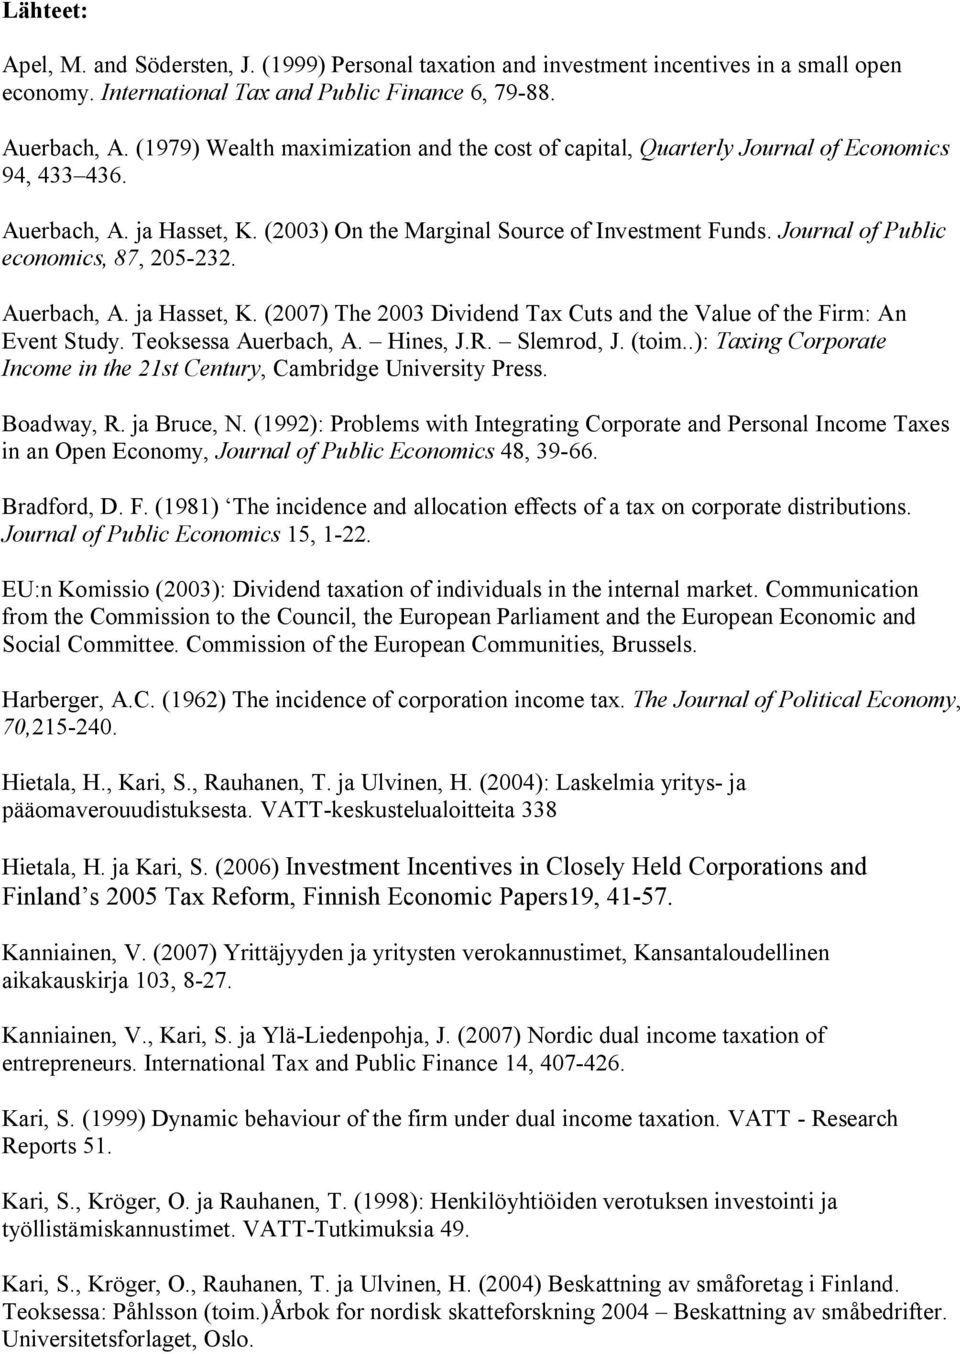 Journal of Public economics, 87, 205-232. Auerbach, A. ja Hasset, K. (2007) The 2003 Dividend Tax Cuts and the Value of the Firm: An Event Study. Teoksessa Auerbach, A. Hines, J.R. Slemrod, J. (toim.